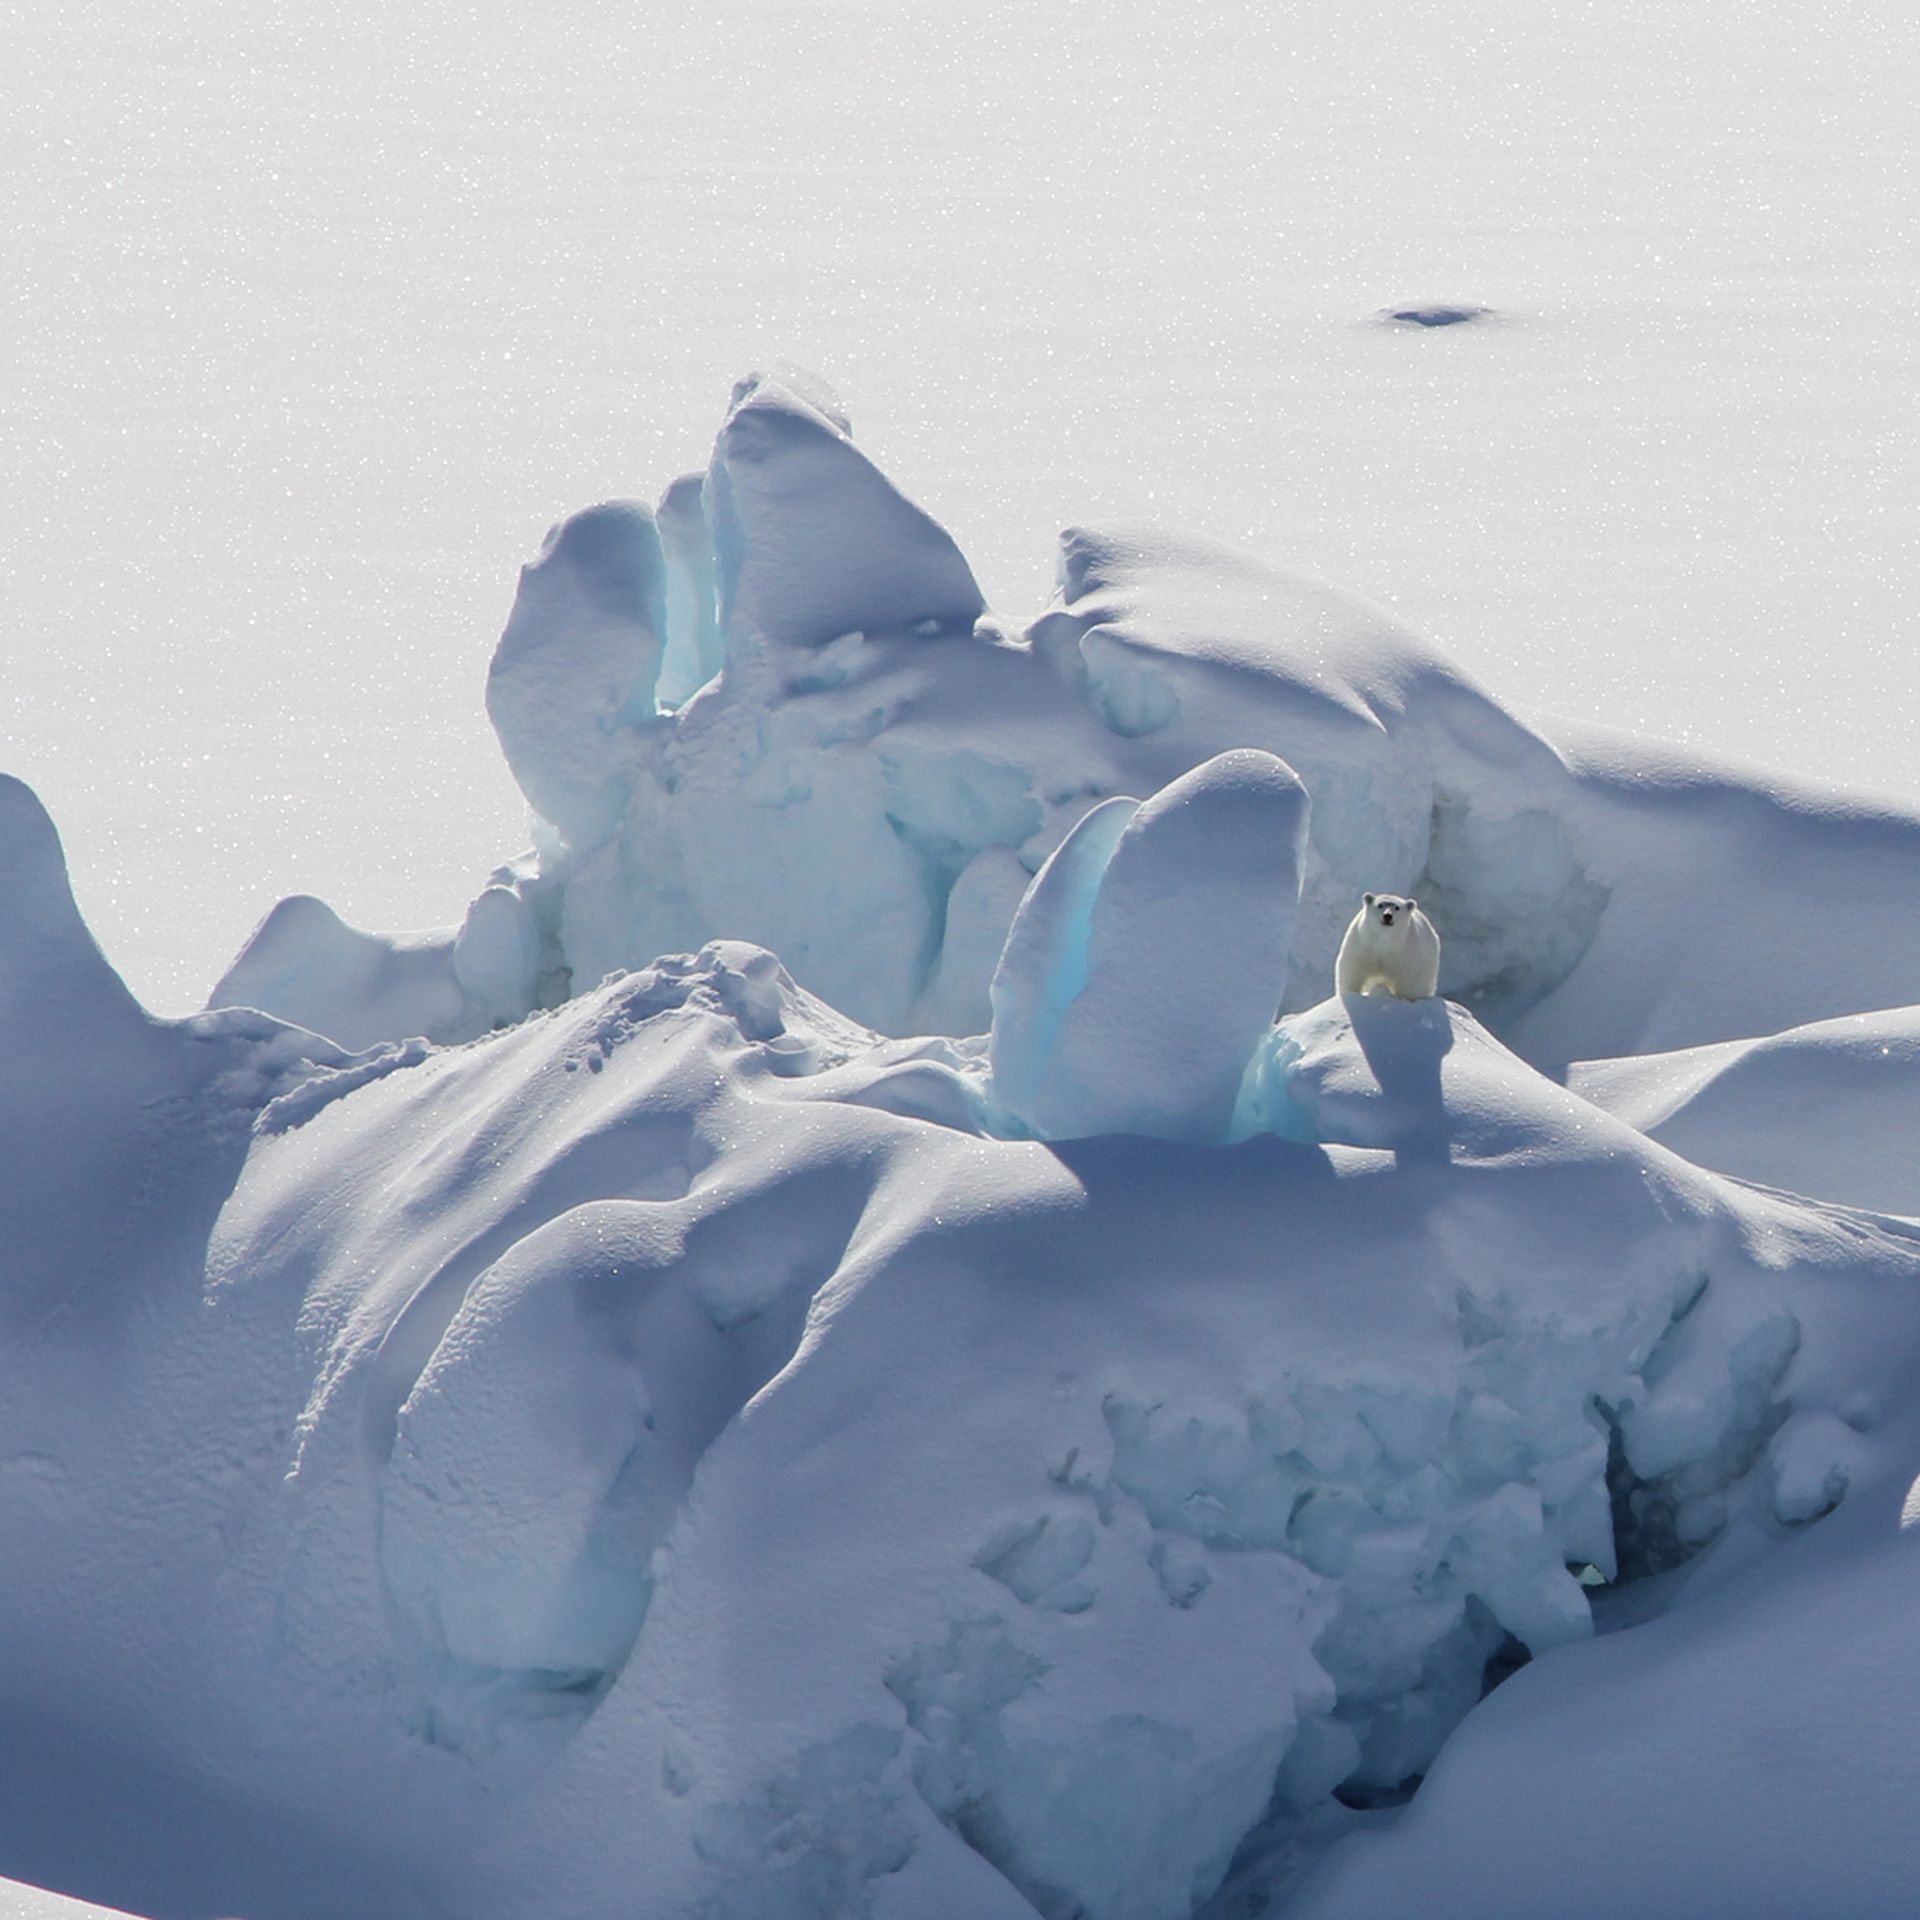  A polar bear stands on a snow-covered iceberg that is surrounded by fast ice, or sea ice connected to the shore, in Southeast Greenland in March 2016. Photo: Kristin Laidre/University of Washington